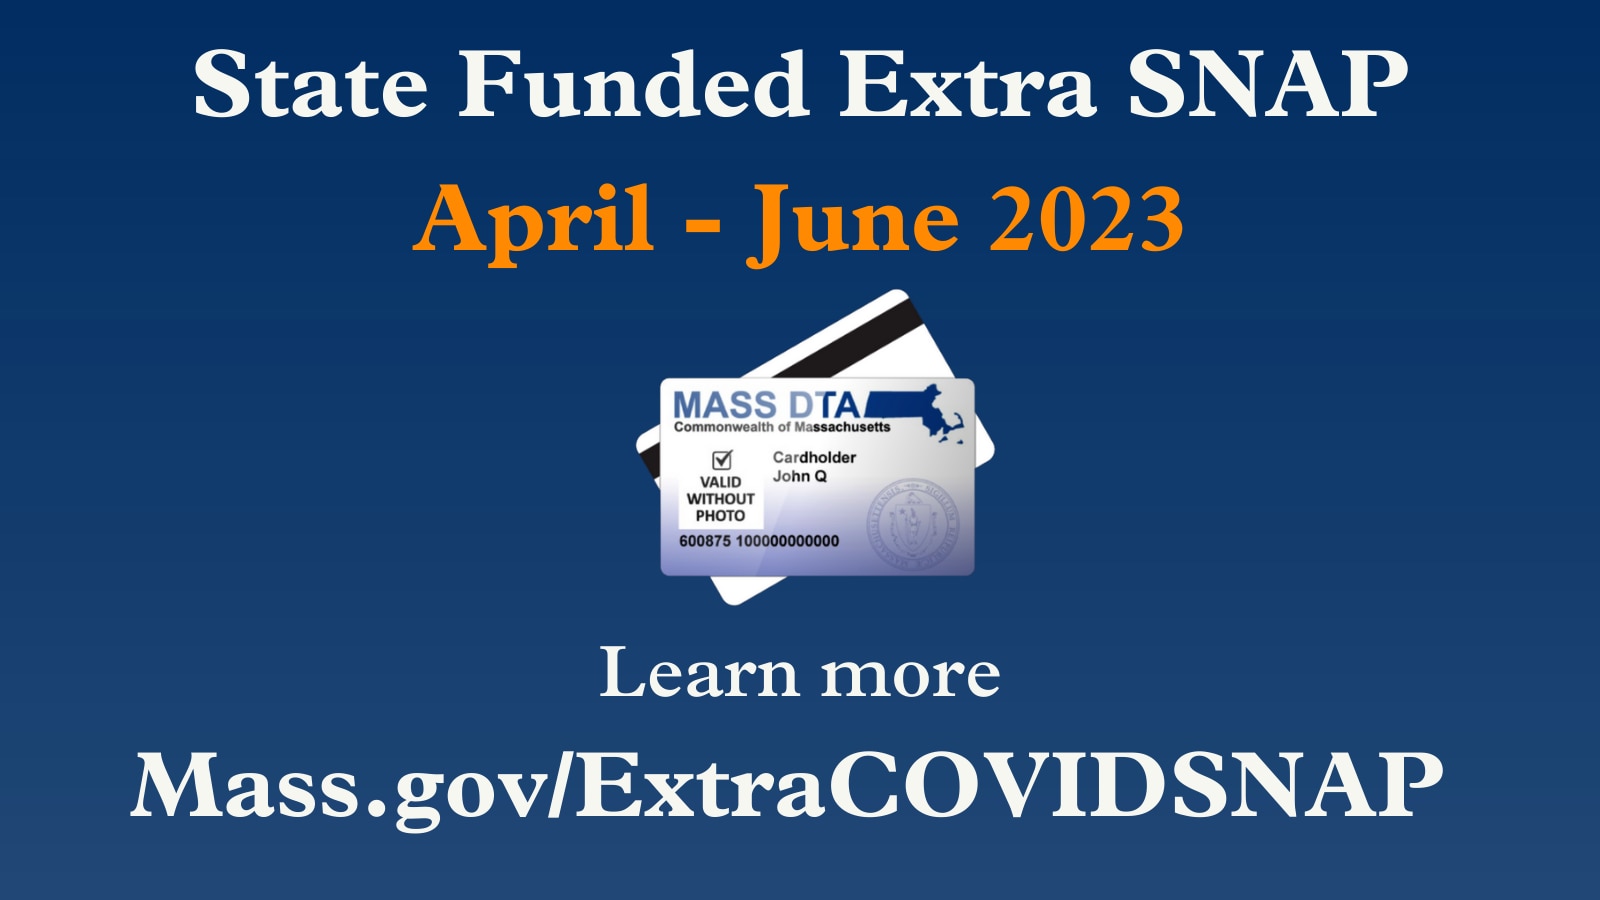 Graphic of an ebt card saying the state funded extra covid SNAP is available April - June 2023 and includes the link to Mass.gov/ExtraCOVIDSNAP